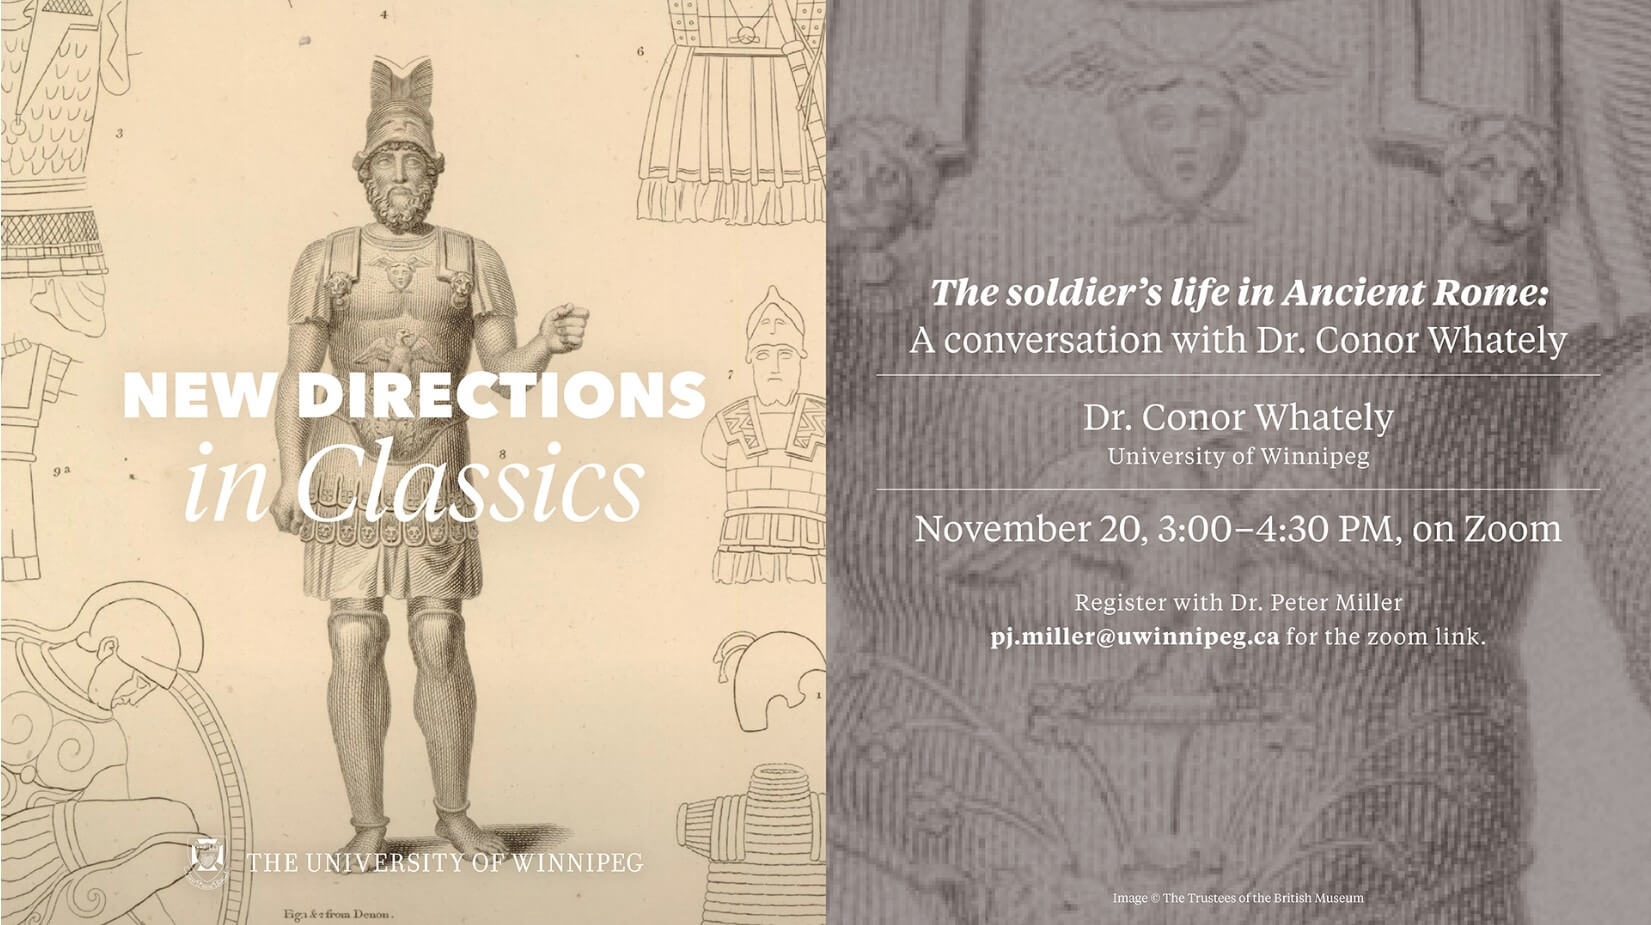 Promotional image for Dr. Conor Whately's lecture on November 20, full text on webpage